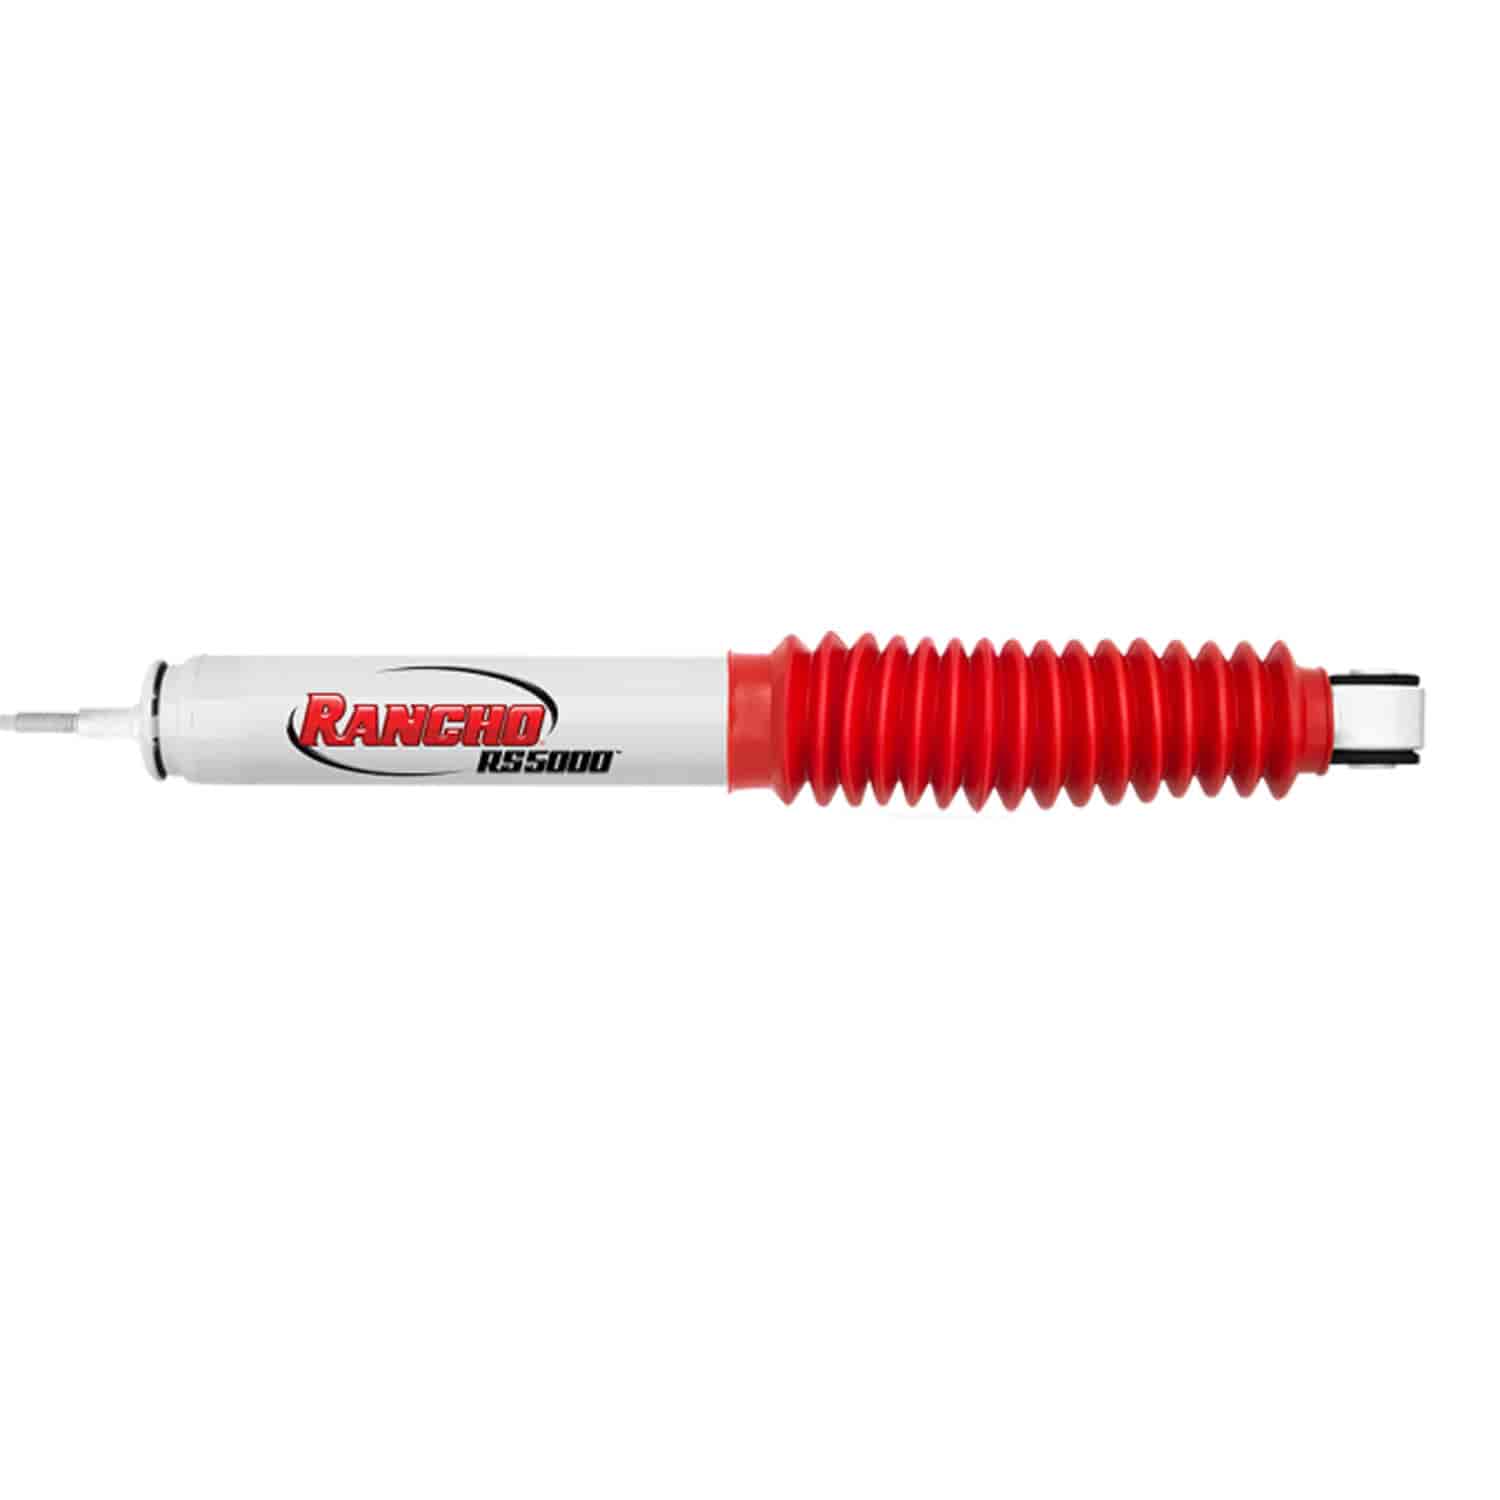 RS5000 Rear Shock Absorber Fits Land Rover Range Rover, Defender and Discovery